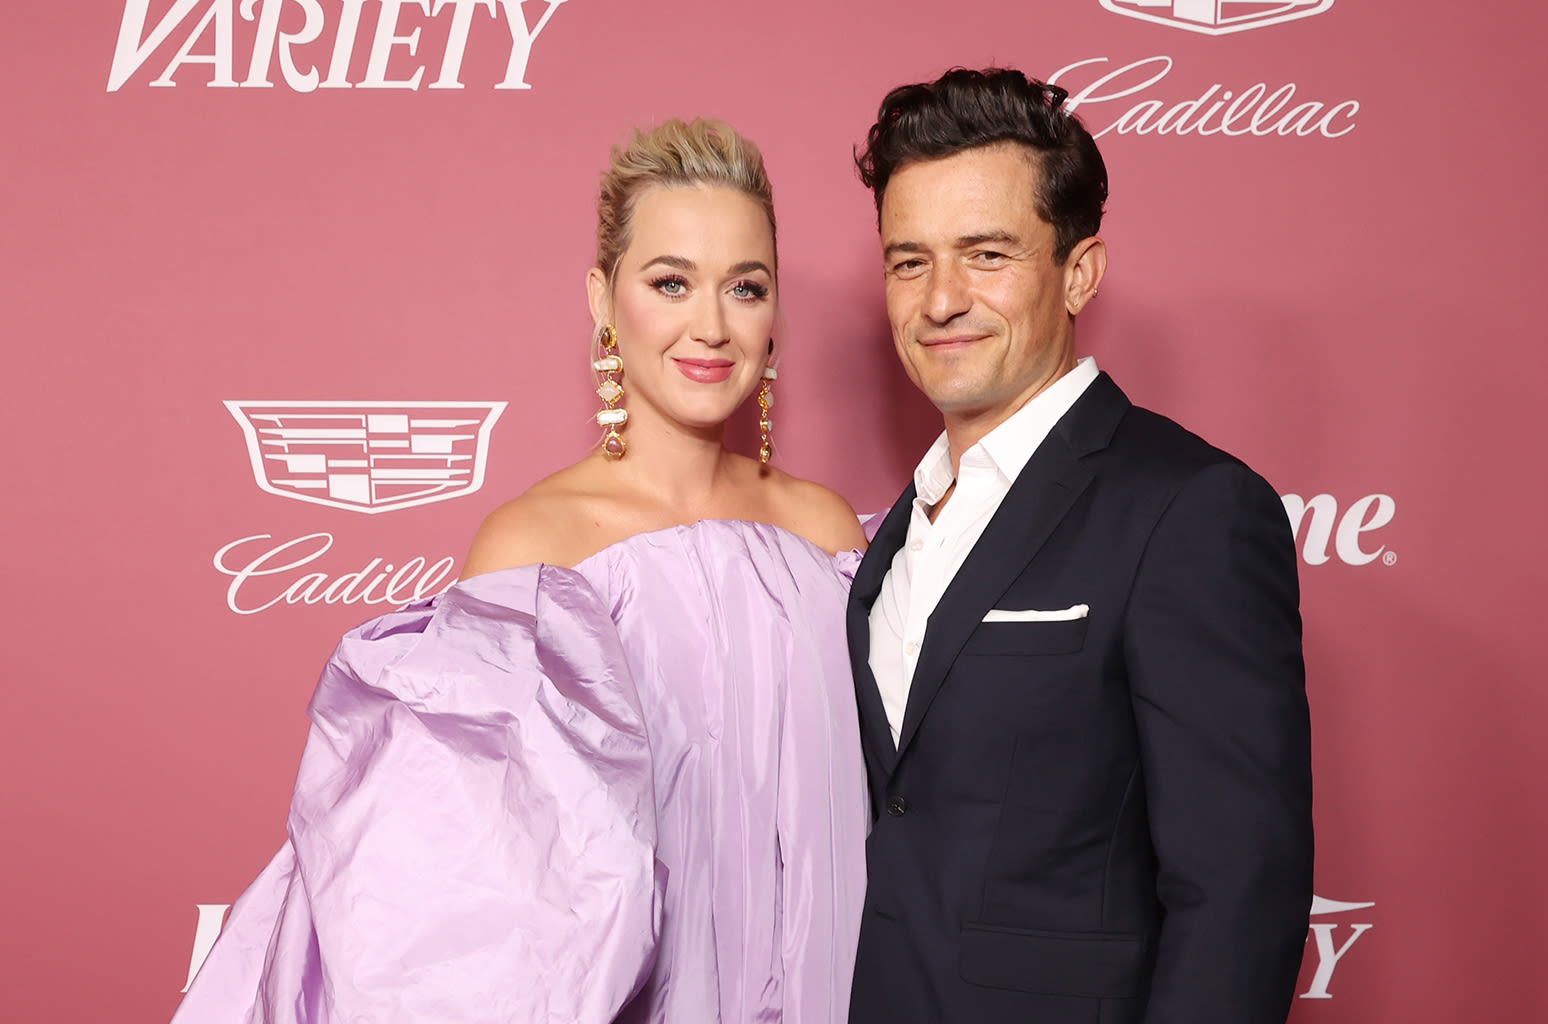 Katy Perry and Orlando Bloom’s Daughter Daisy Dove Made Her First Public Appearance During ‘American Idol’